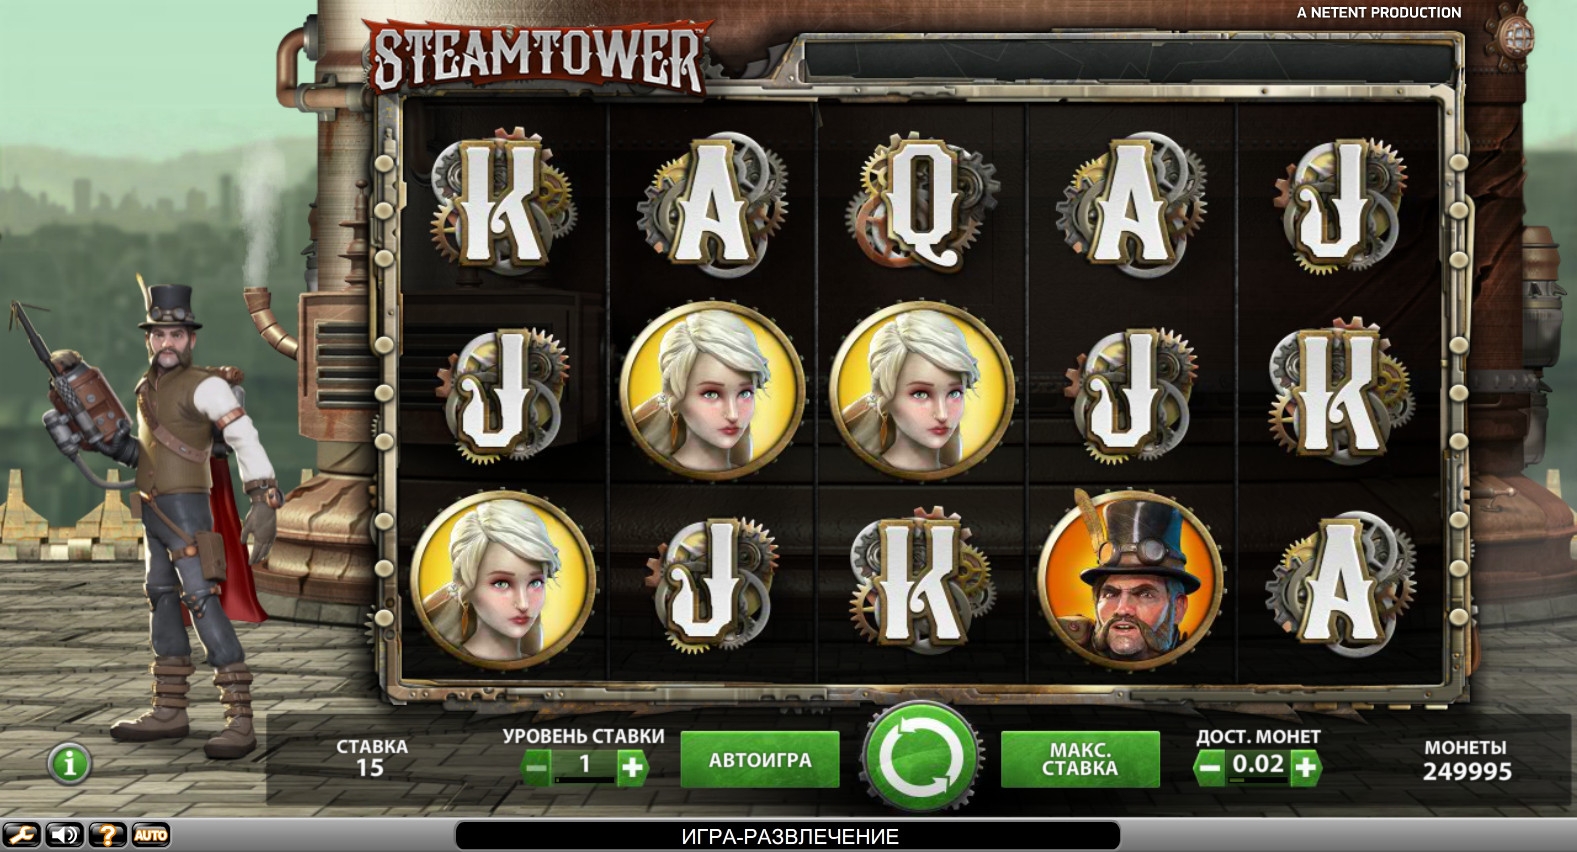 Steam Tower (Steam Tower) from category Slots